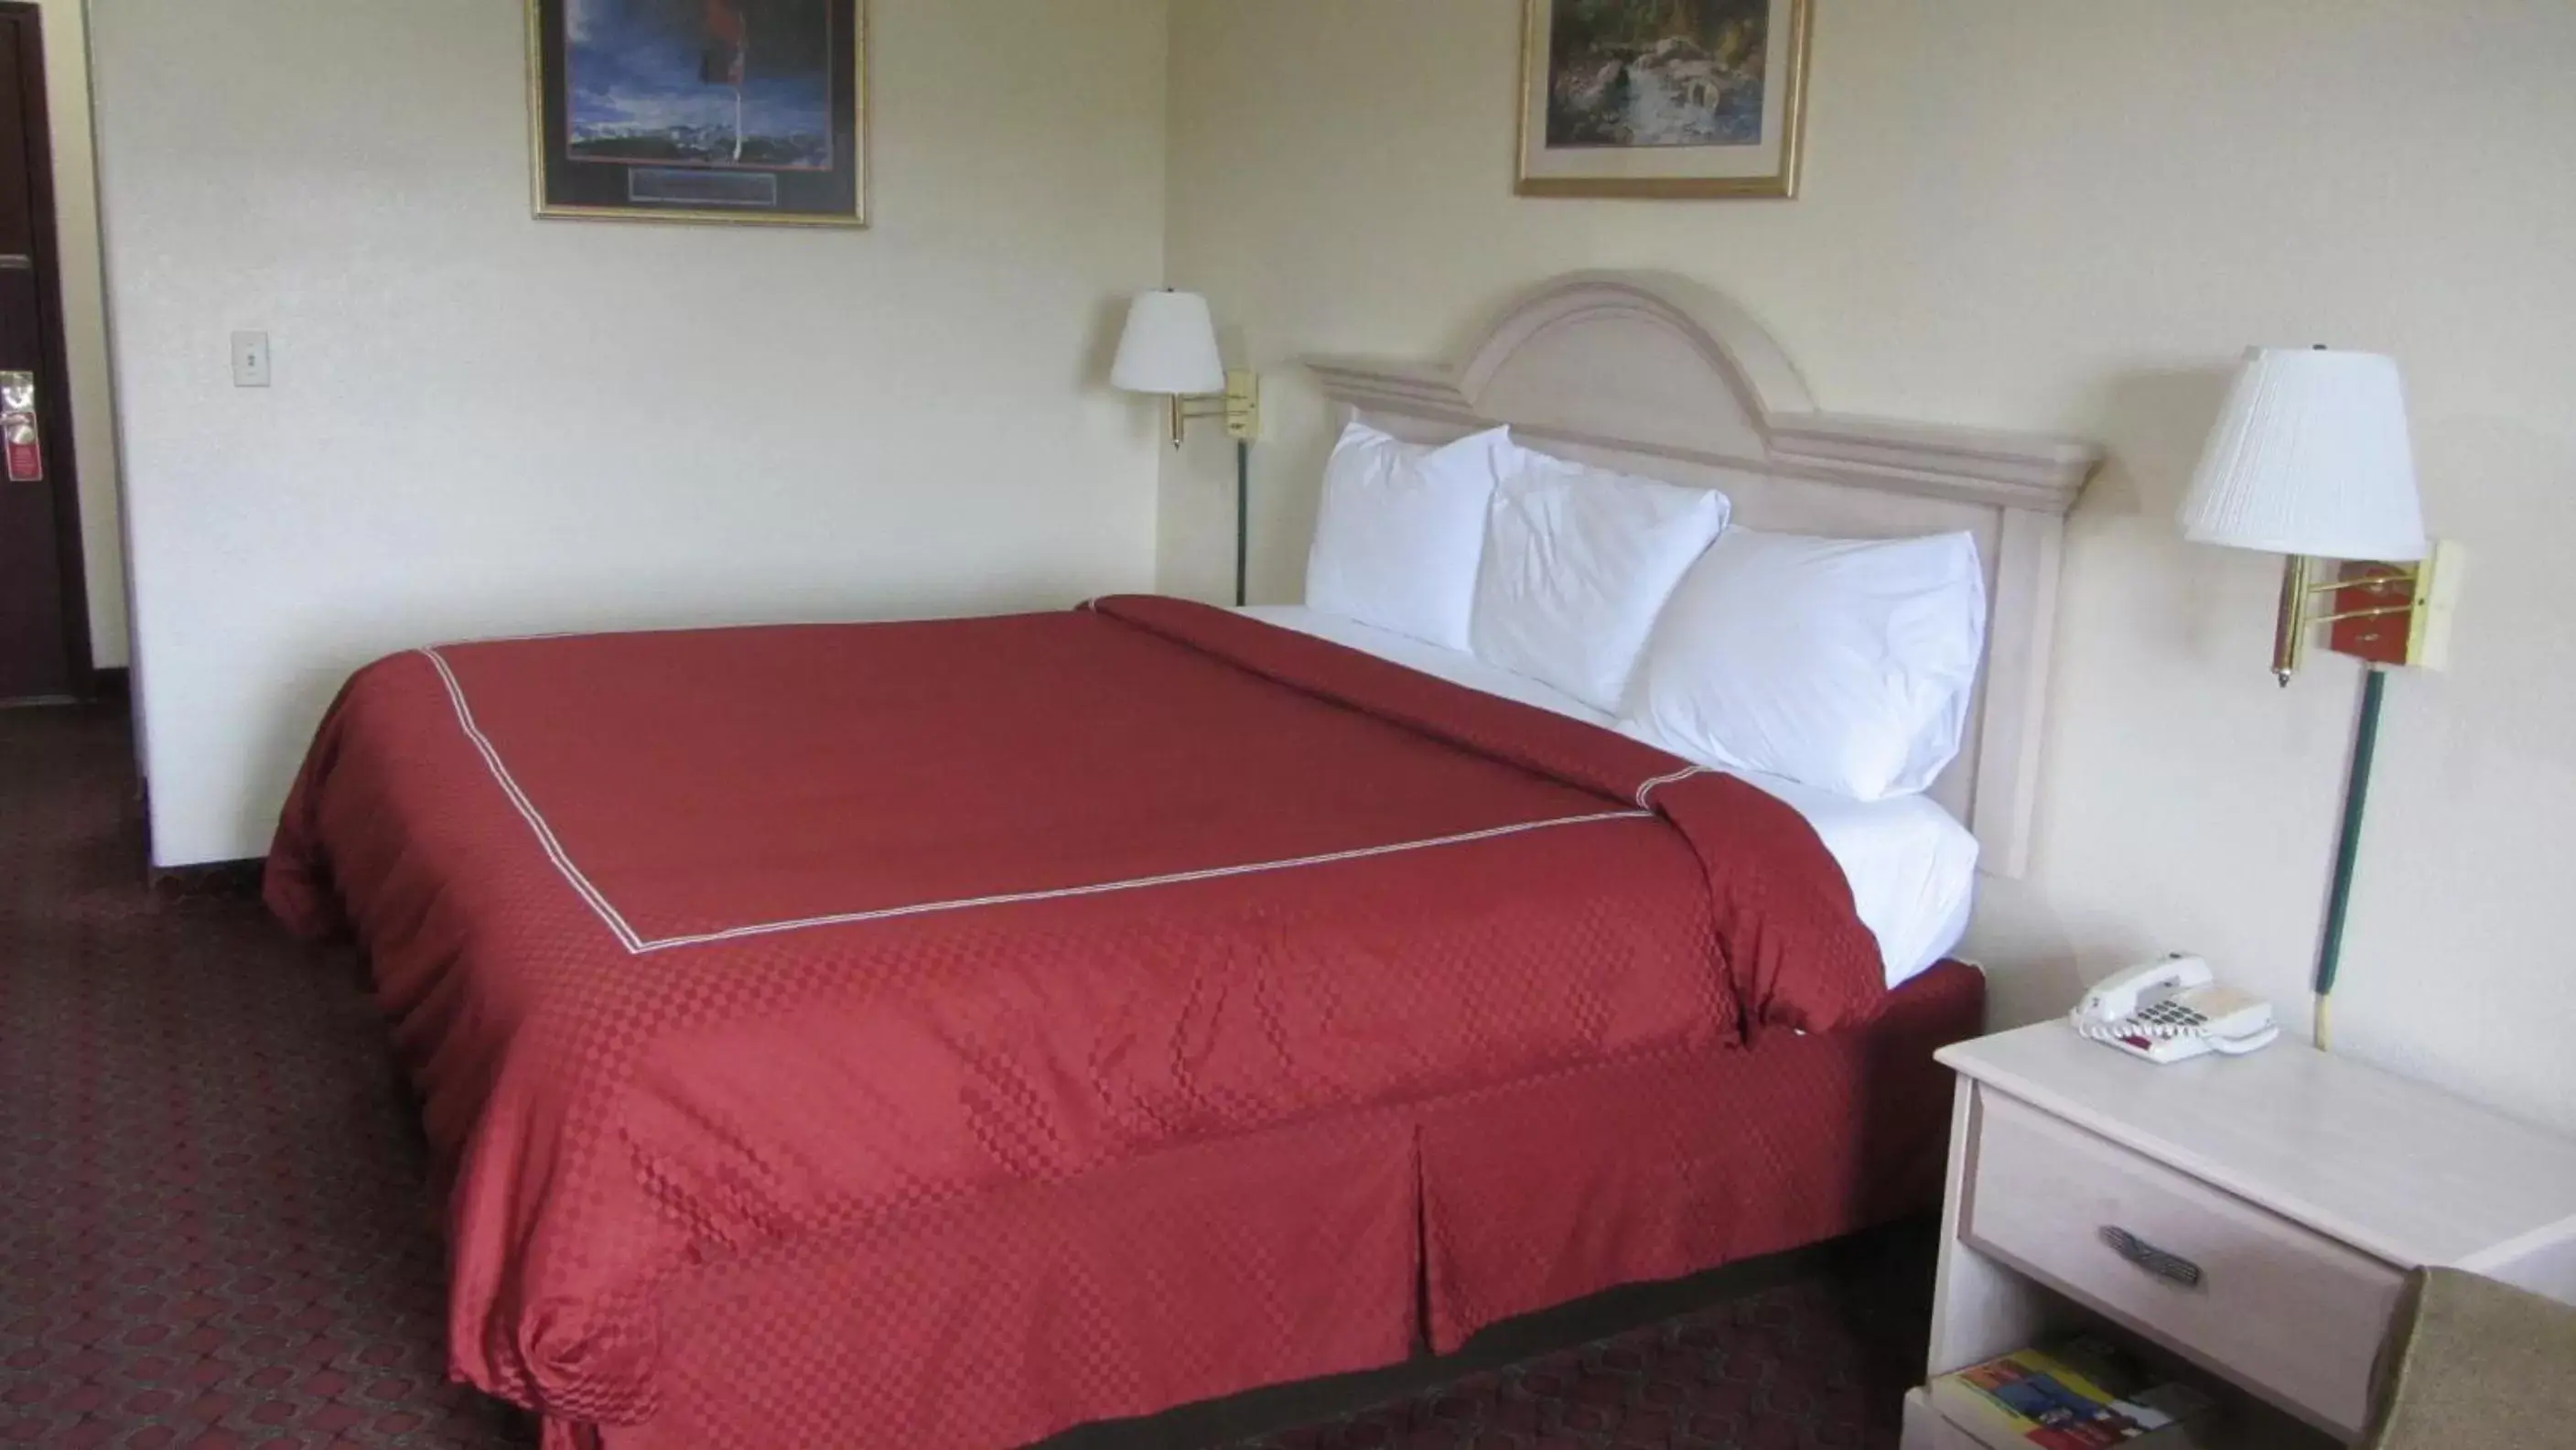 Bed in Americas Best Value Inn and Suites Houston FM 1960